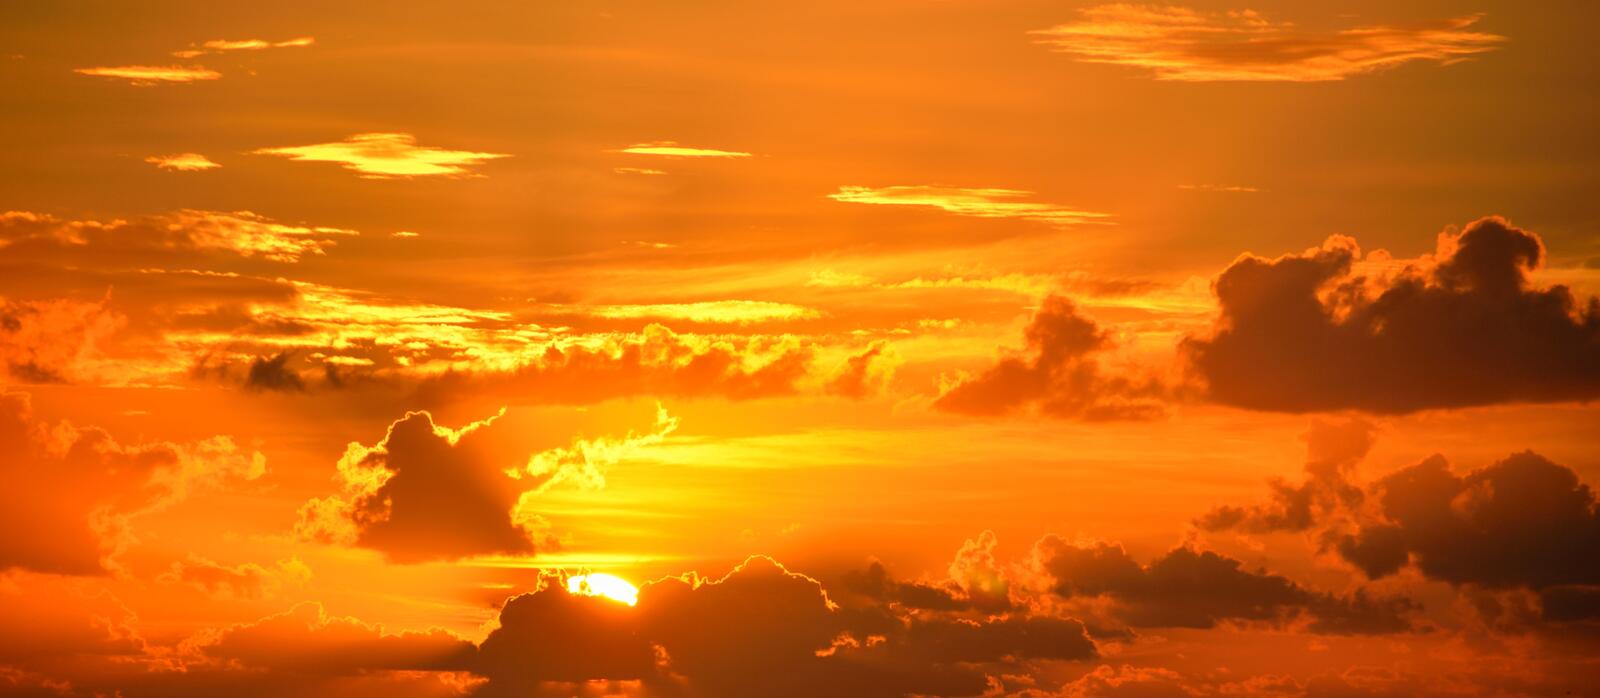 Free photo A beautiful sunset in an amber sky with clouds